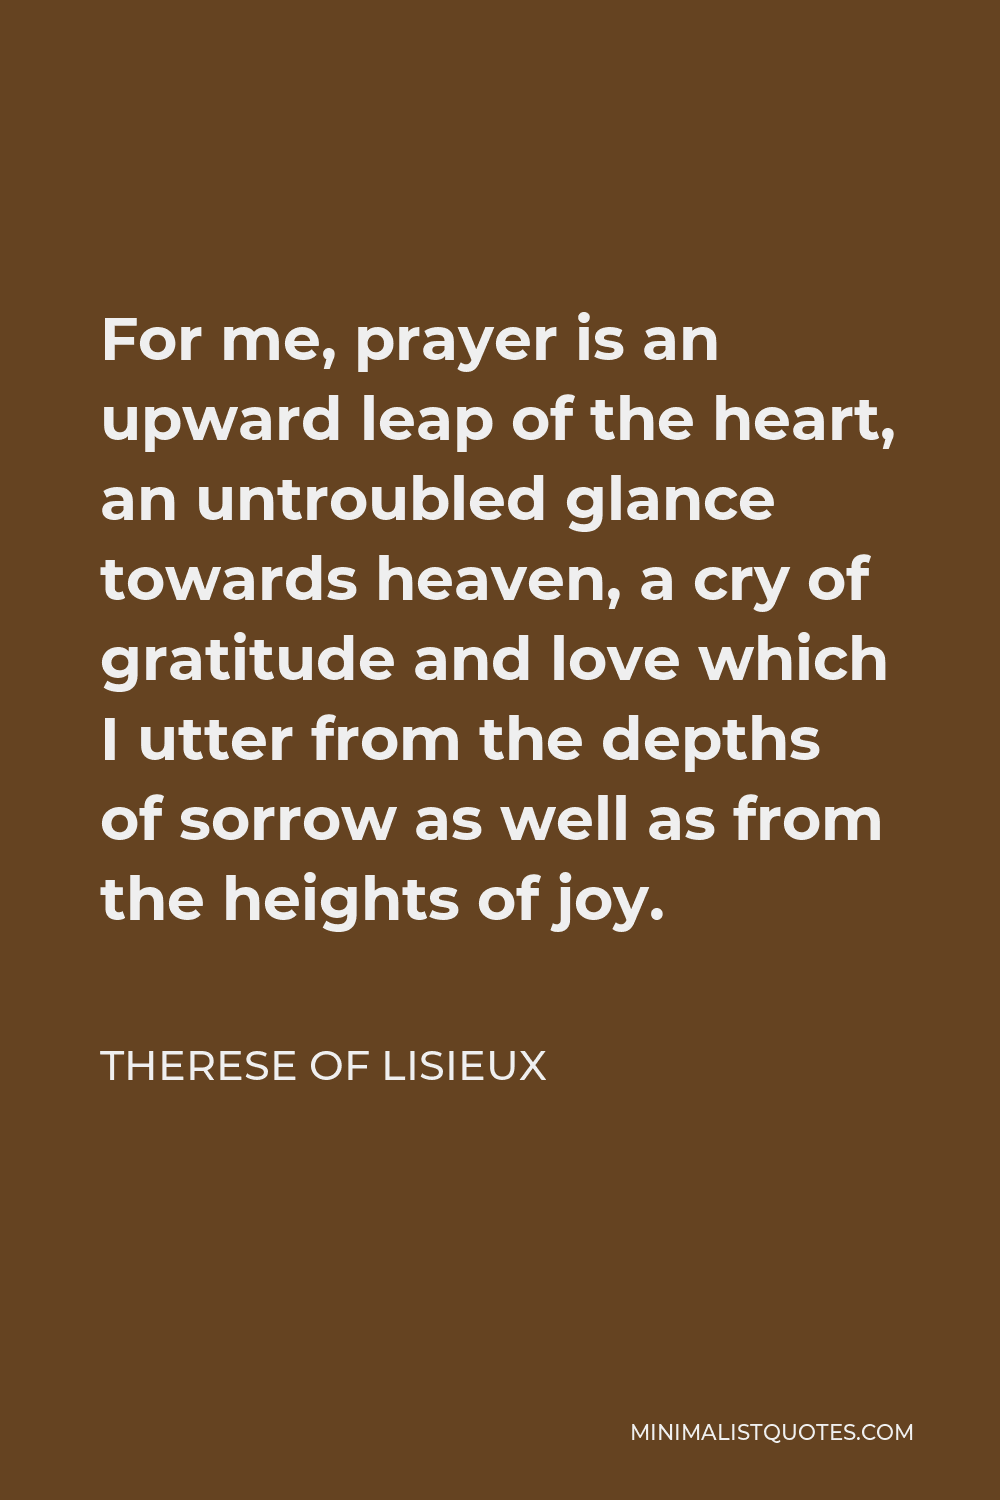 Therese of Lisieux Quote - For me, prayer is an upward leap of the heart, an untroubled glance towards heaven, a cry of gratitude and love which I utter from the depths of sorrow as well as from the heights of joy.